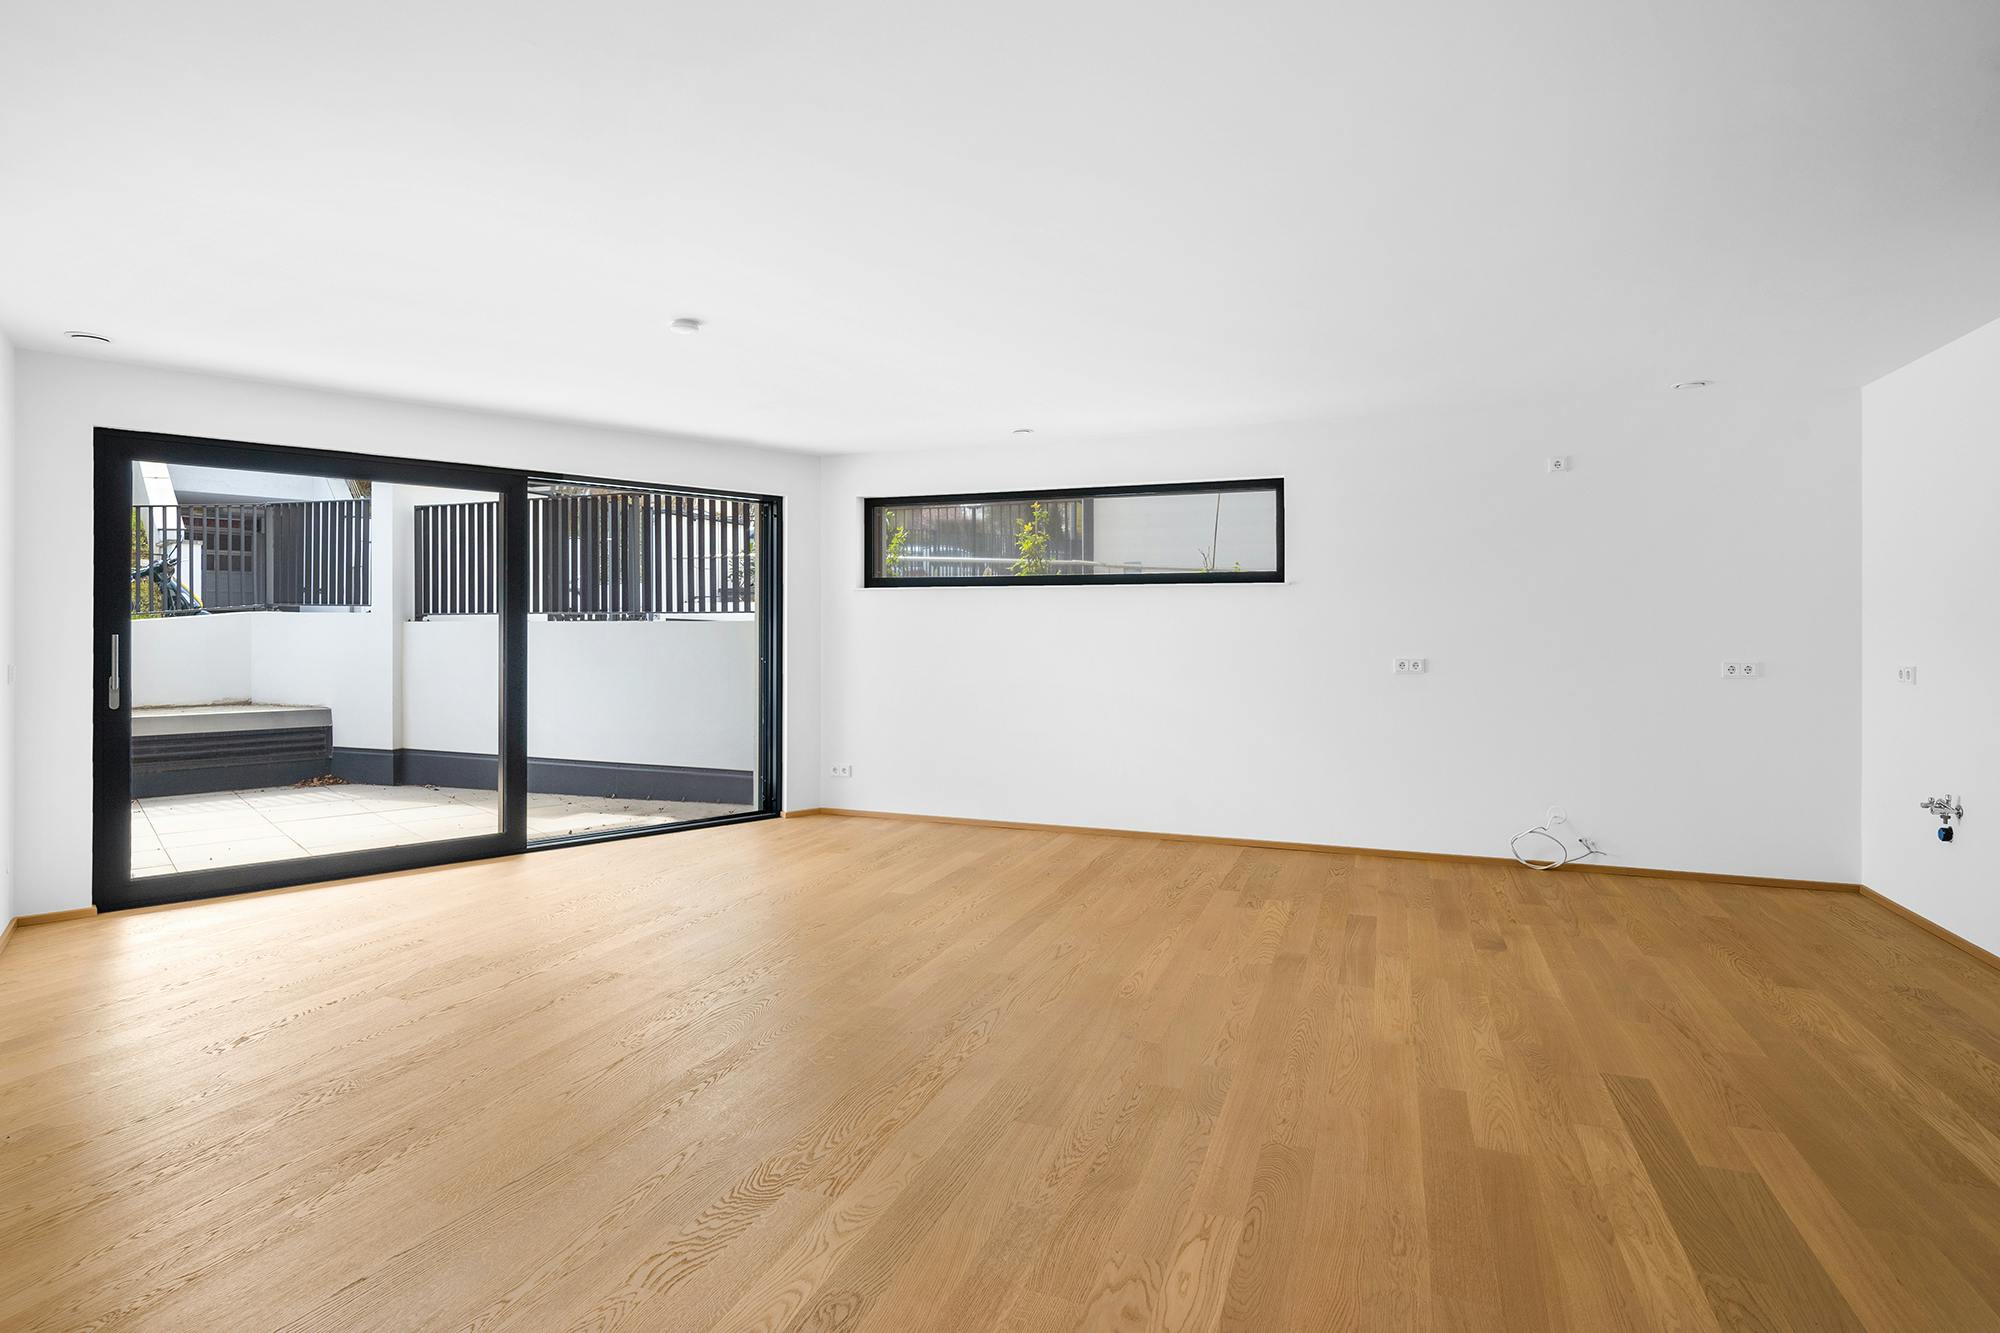 NEW apartment with south-facing terrace in Glanzing